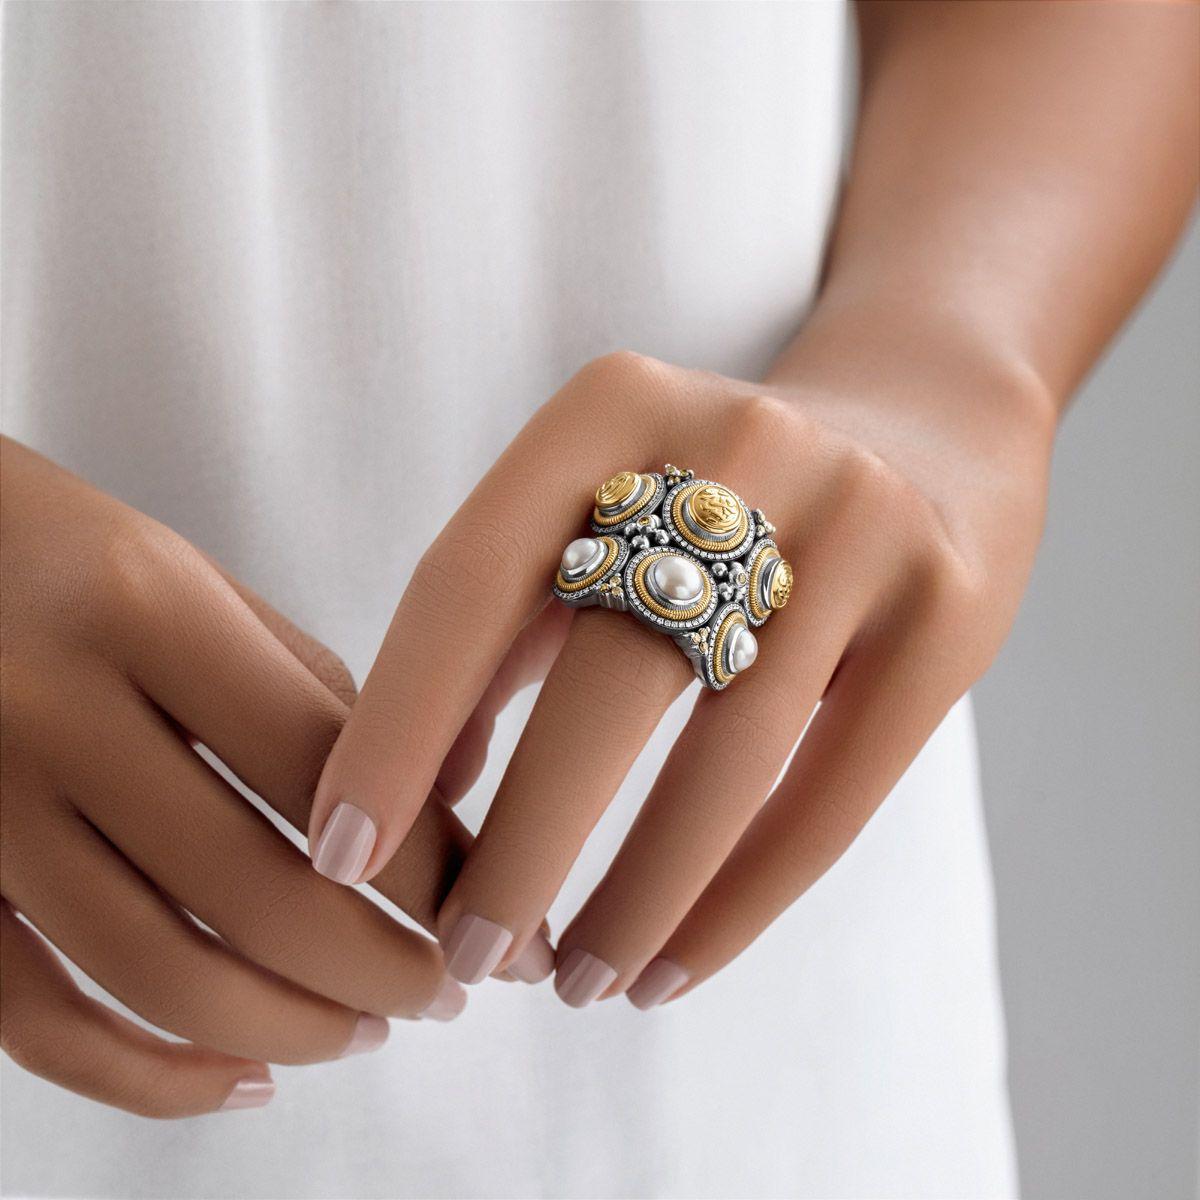 18 Karat Gold and Sterling Silver ring inspired from old tribal jewelry adorned with 0.67 carat pave-set White Diamonds, 0.25 carat Champagne Diamonds and 2.10 gram Pearls, inscribed with 